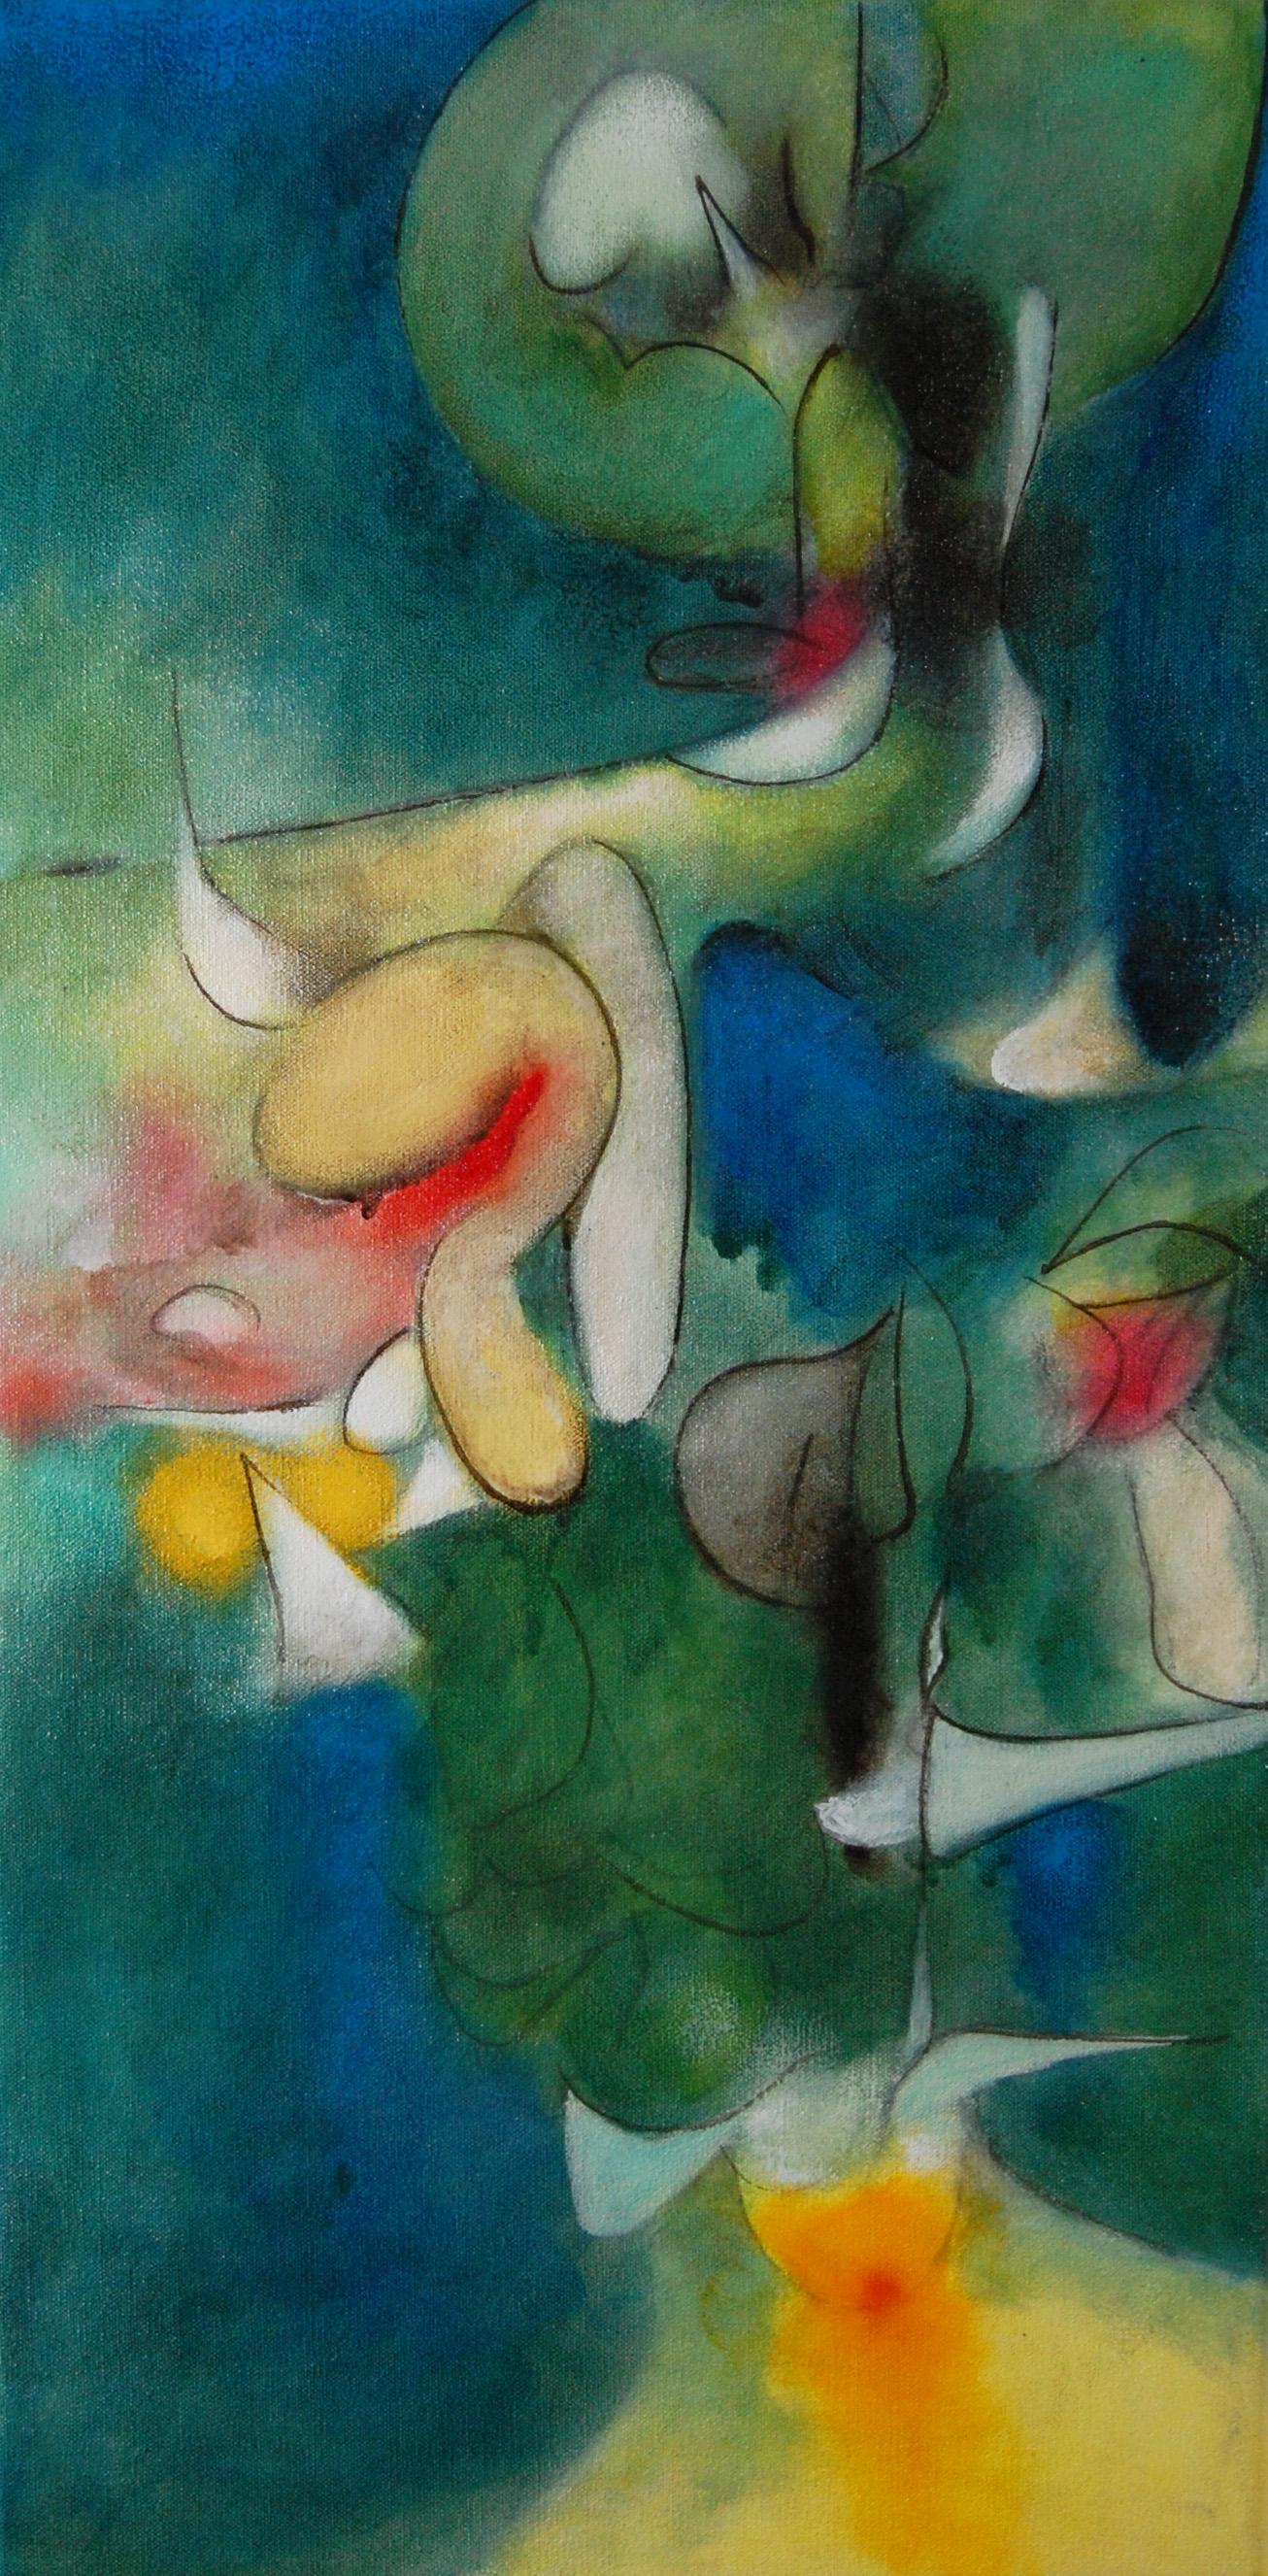 Abstract Painting, "Sky Garden - Fruiting Bodies"